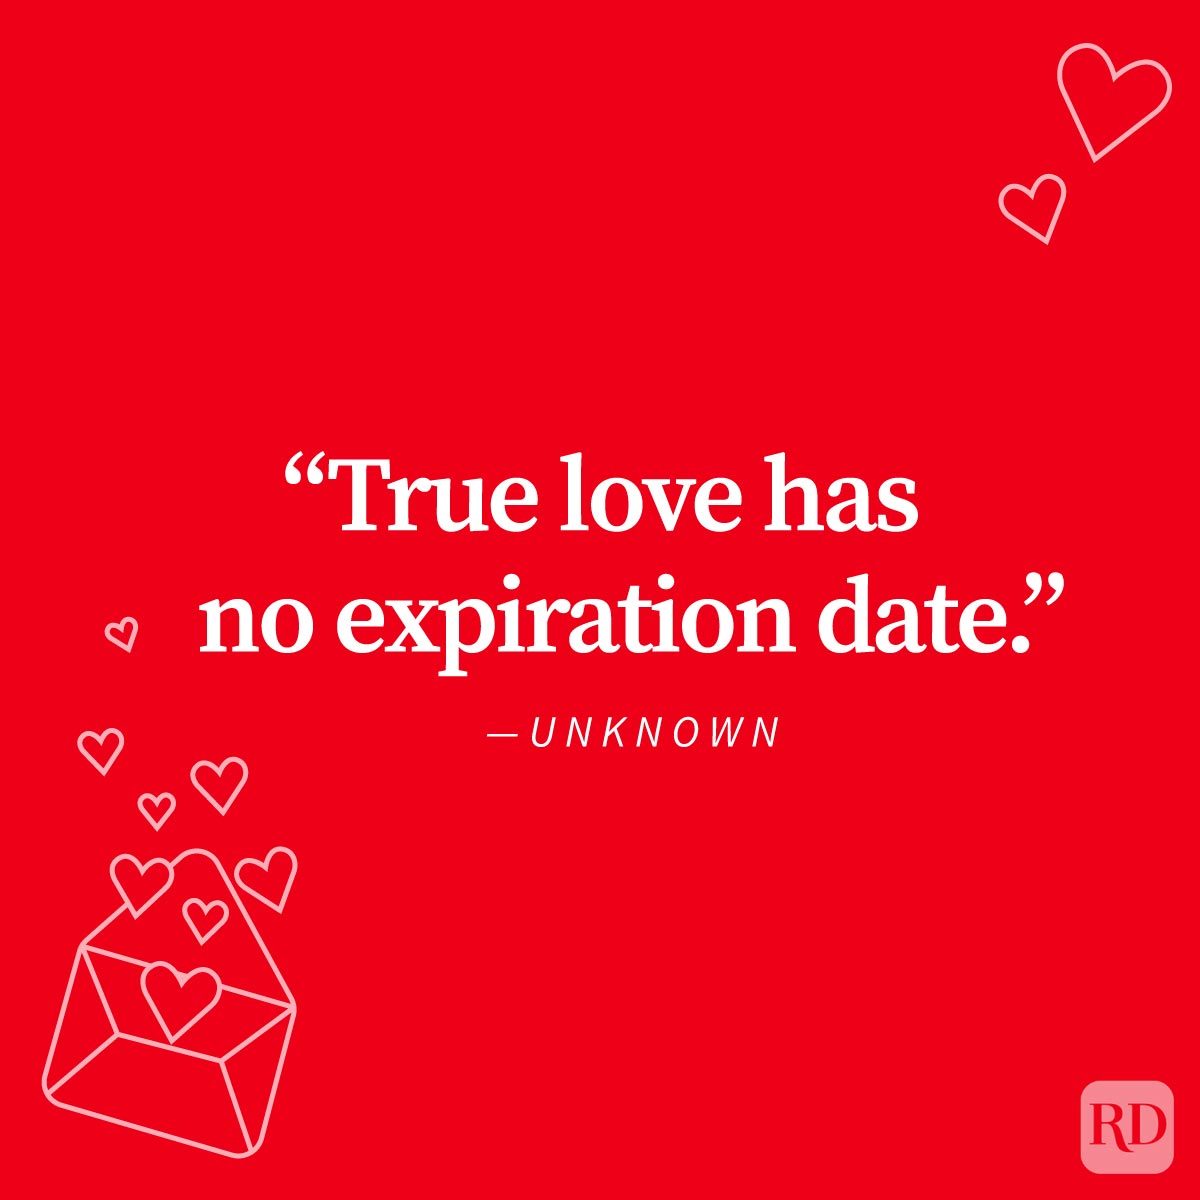 100 Love Quotes to Share with Your Special Someone